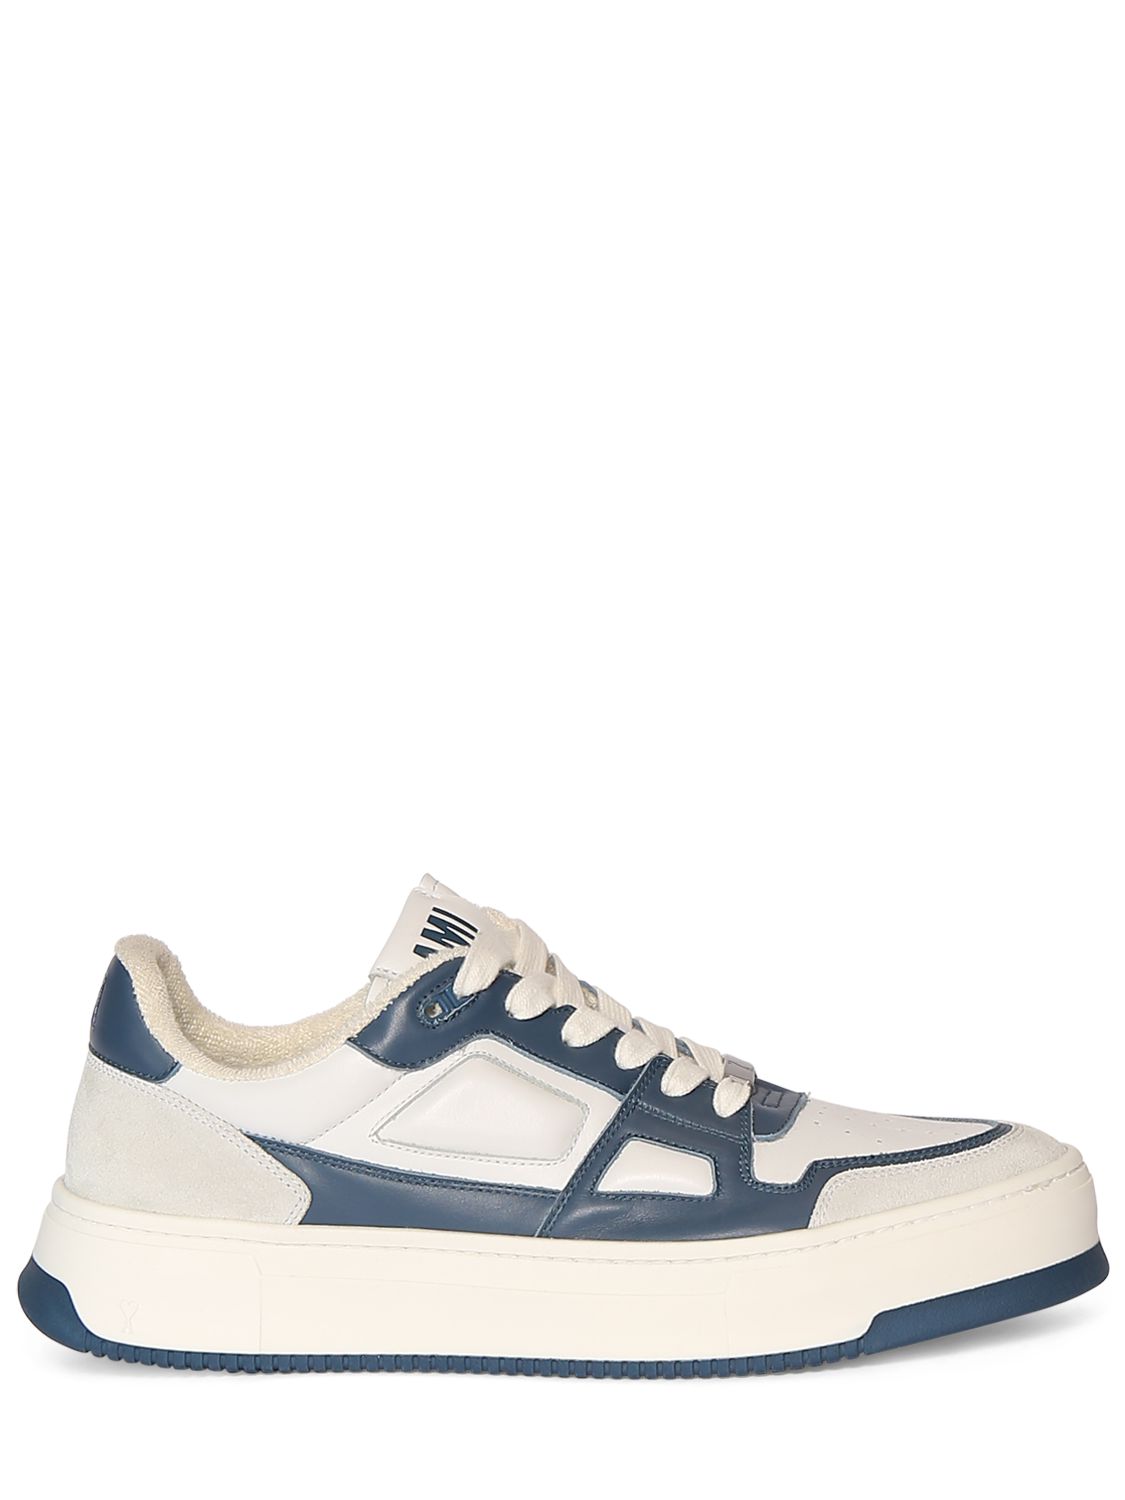 New Arcade Leather Low Top Sneakers